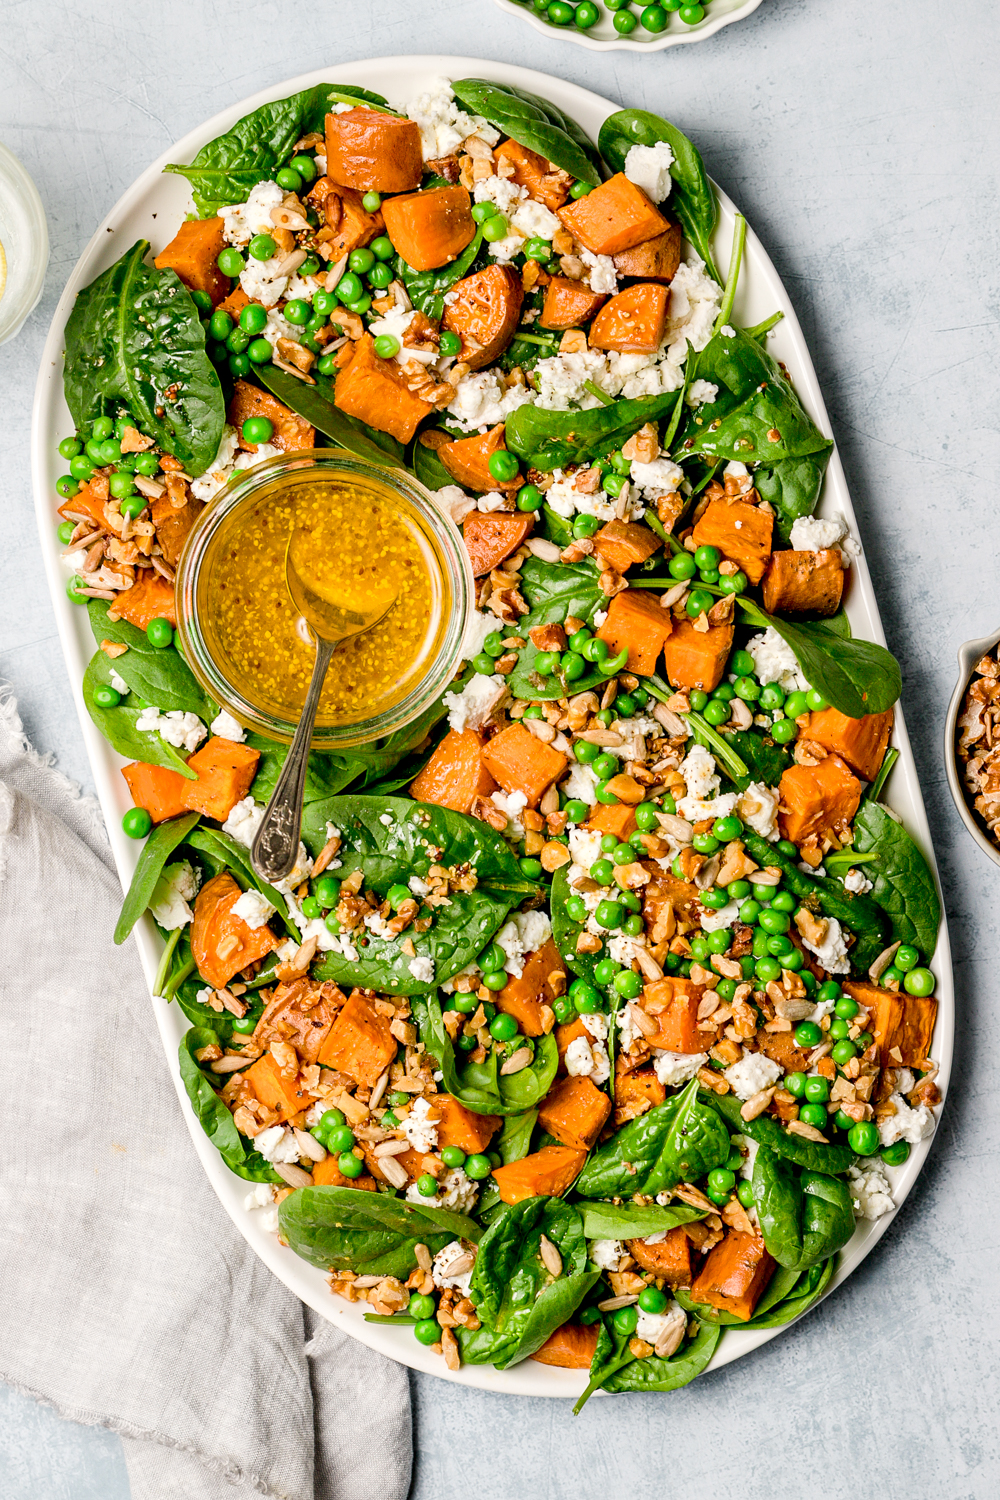 spinach, sweet potato, pea and feta salad on oval ceramic plate, small dish of salad dressing